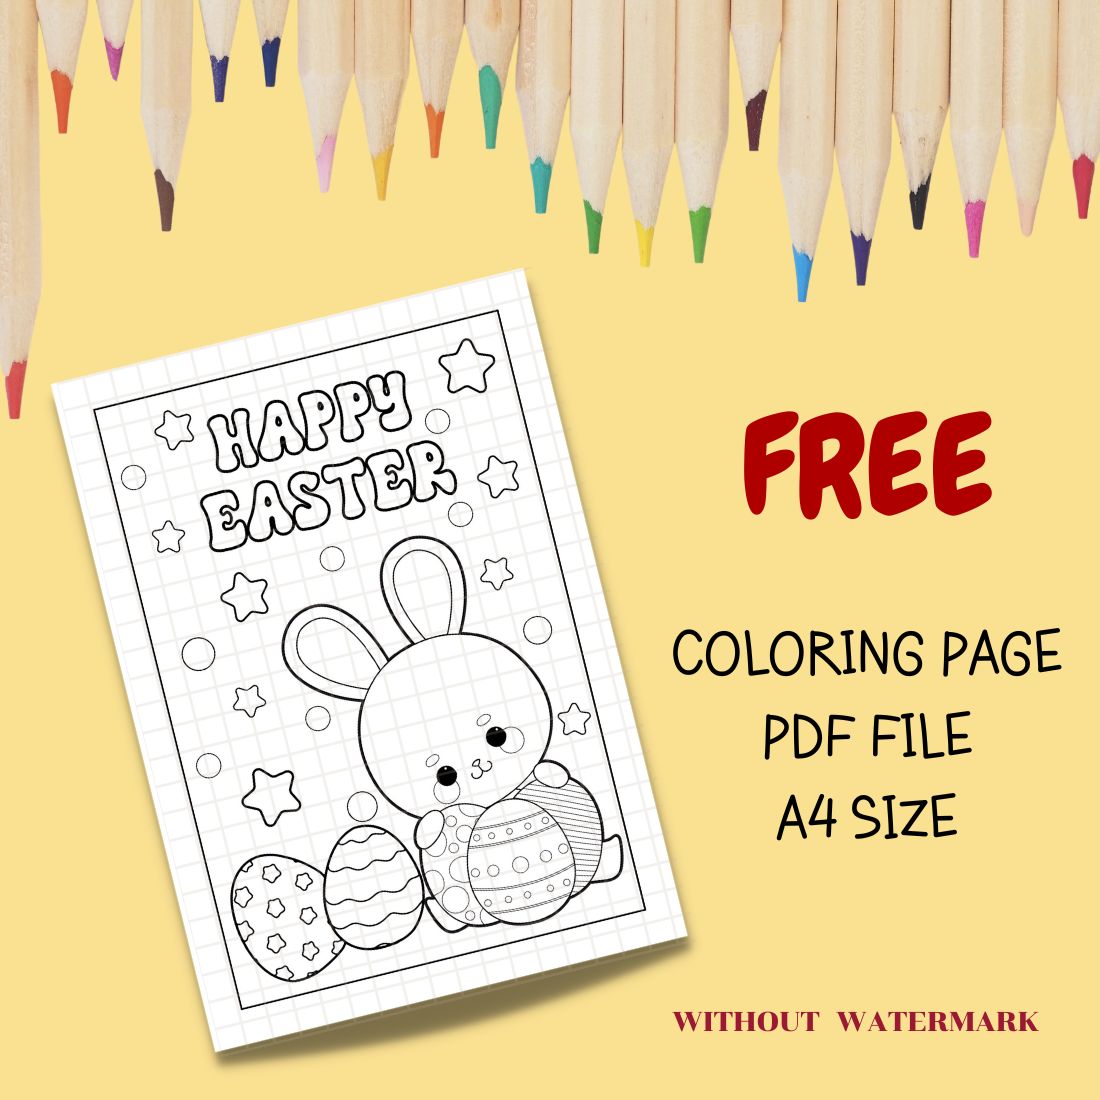 FREE HAPPY EASTER COLORING PAGE cover image.